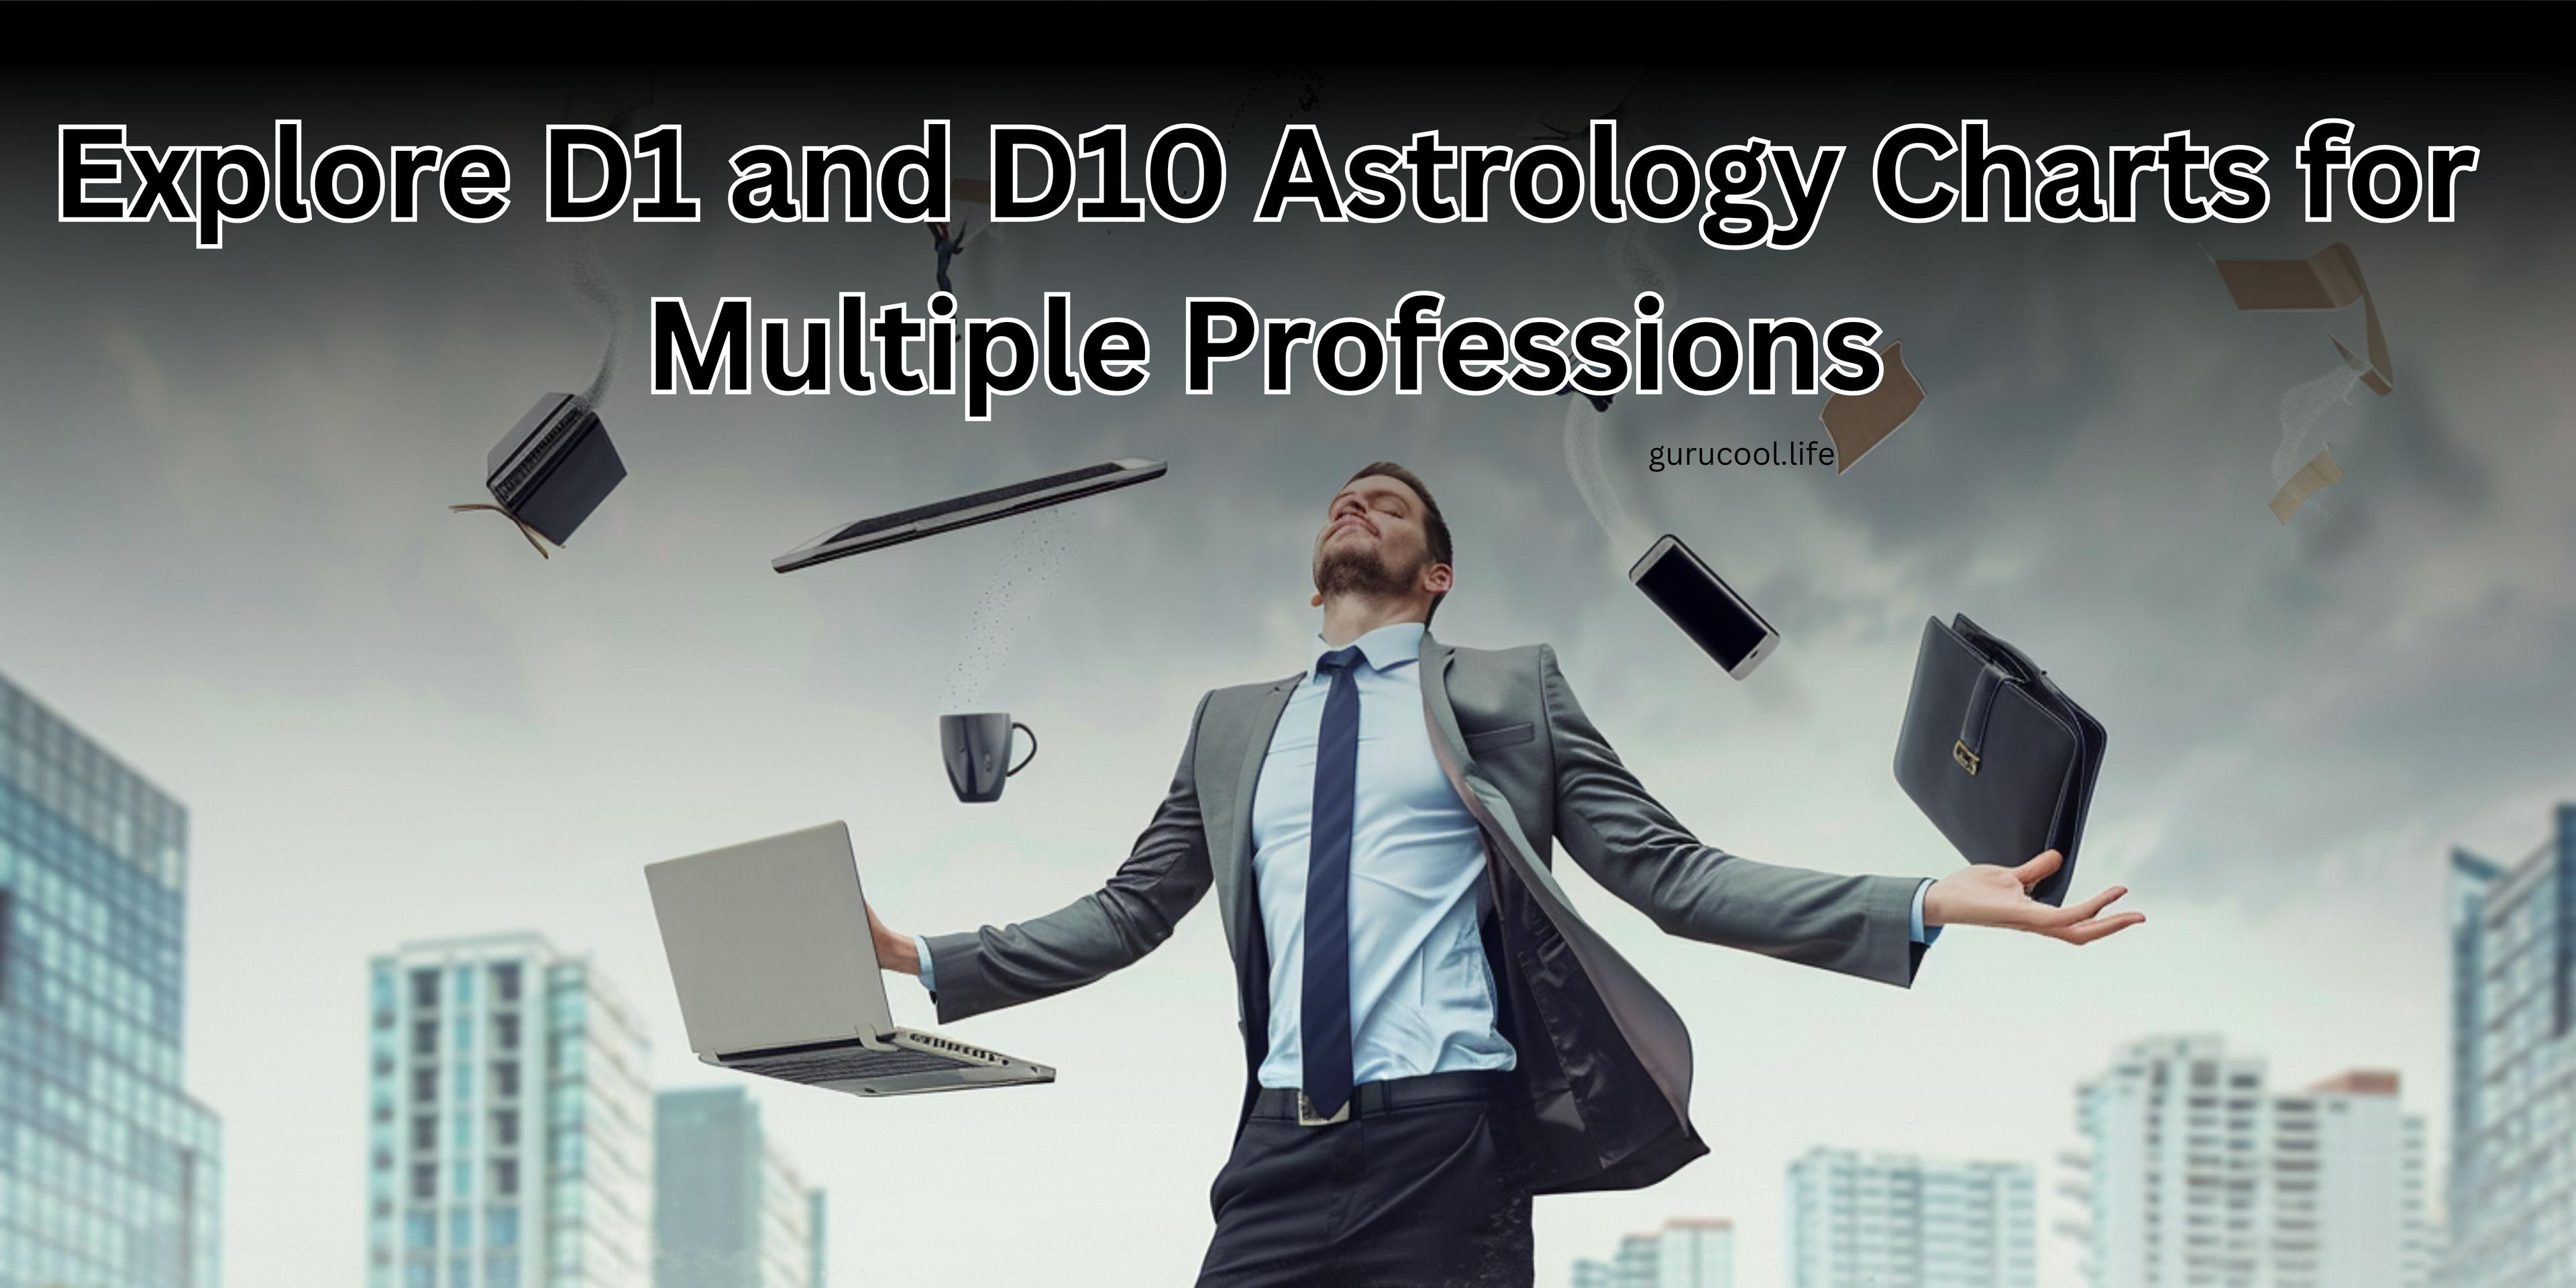 Explore D1 and D10 Astrology Charts for Multiple Professions